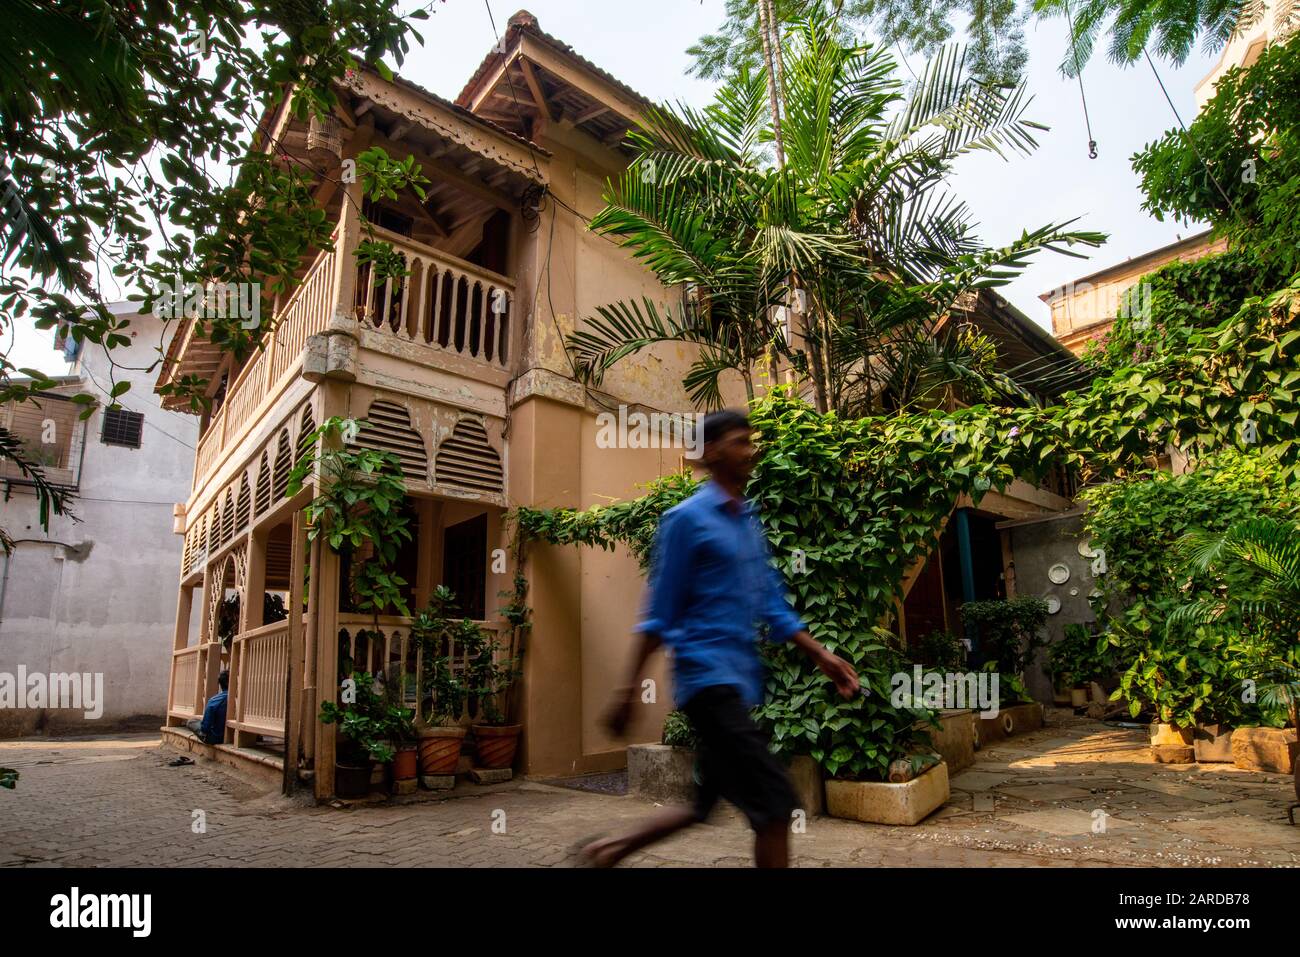 An heritage wooden house in an old district of Mumbai with an unrecognisable man passing by, India Stock Photo